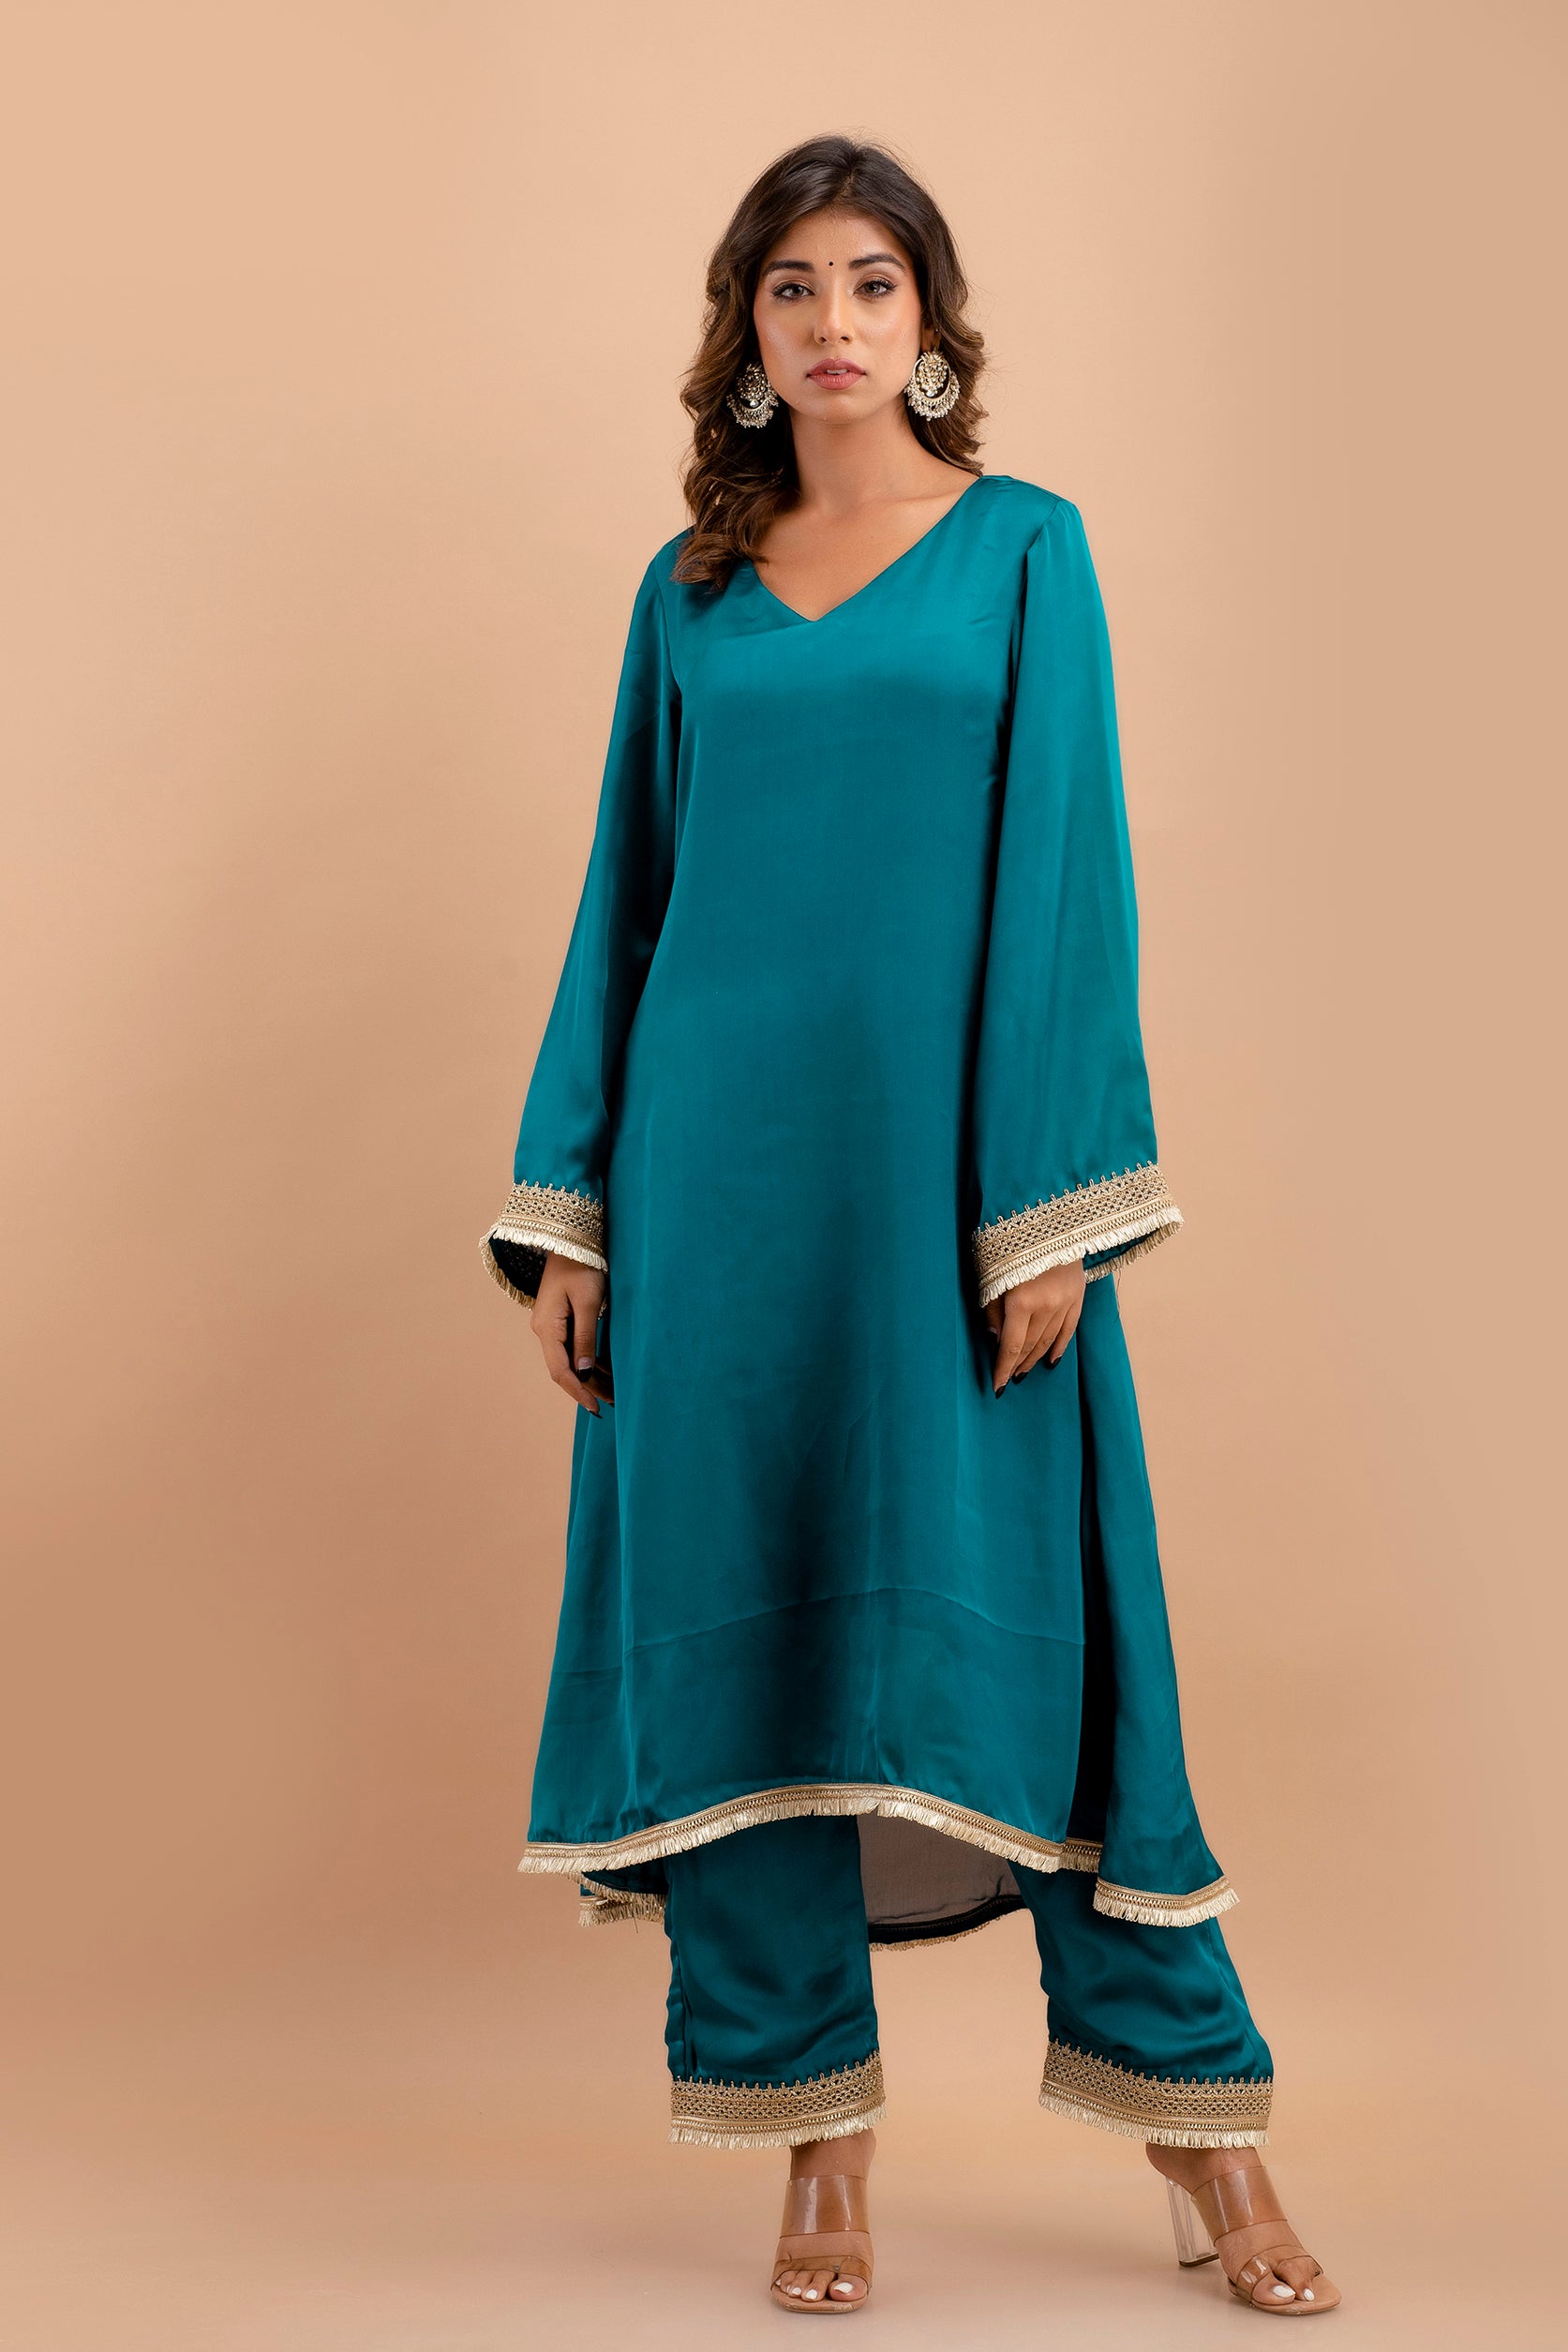 Adorned with Intricate Lace Embellishments, the Ensemble Features a Kurta, Pants, and Dupatta